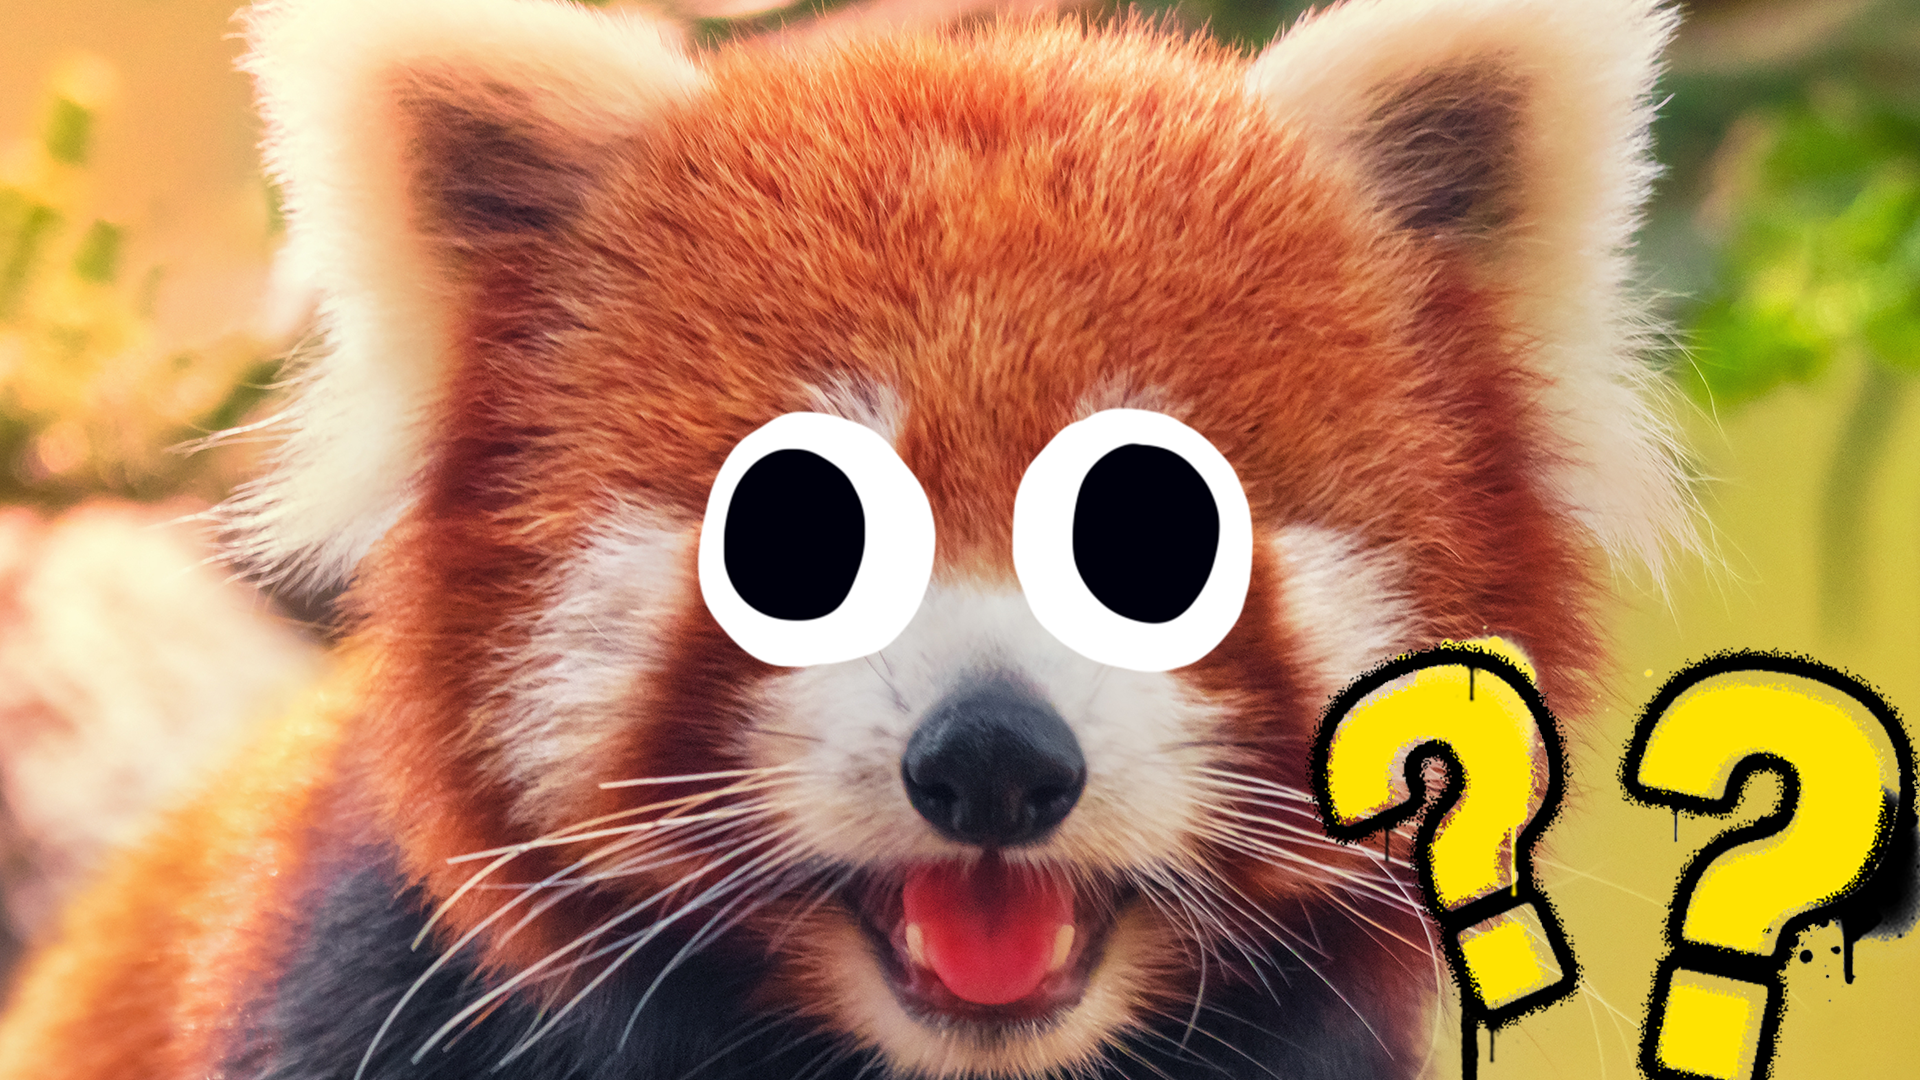 Red panda with Beano eyes and question marks